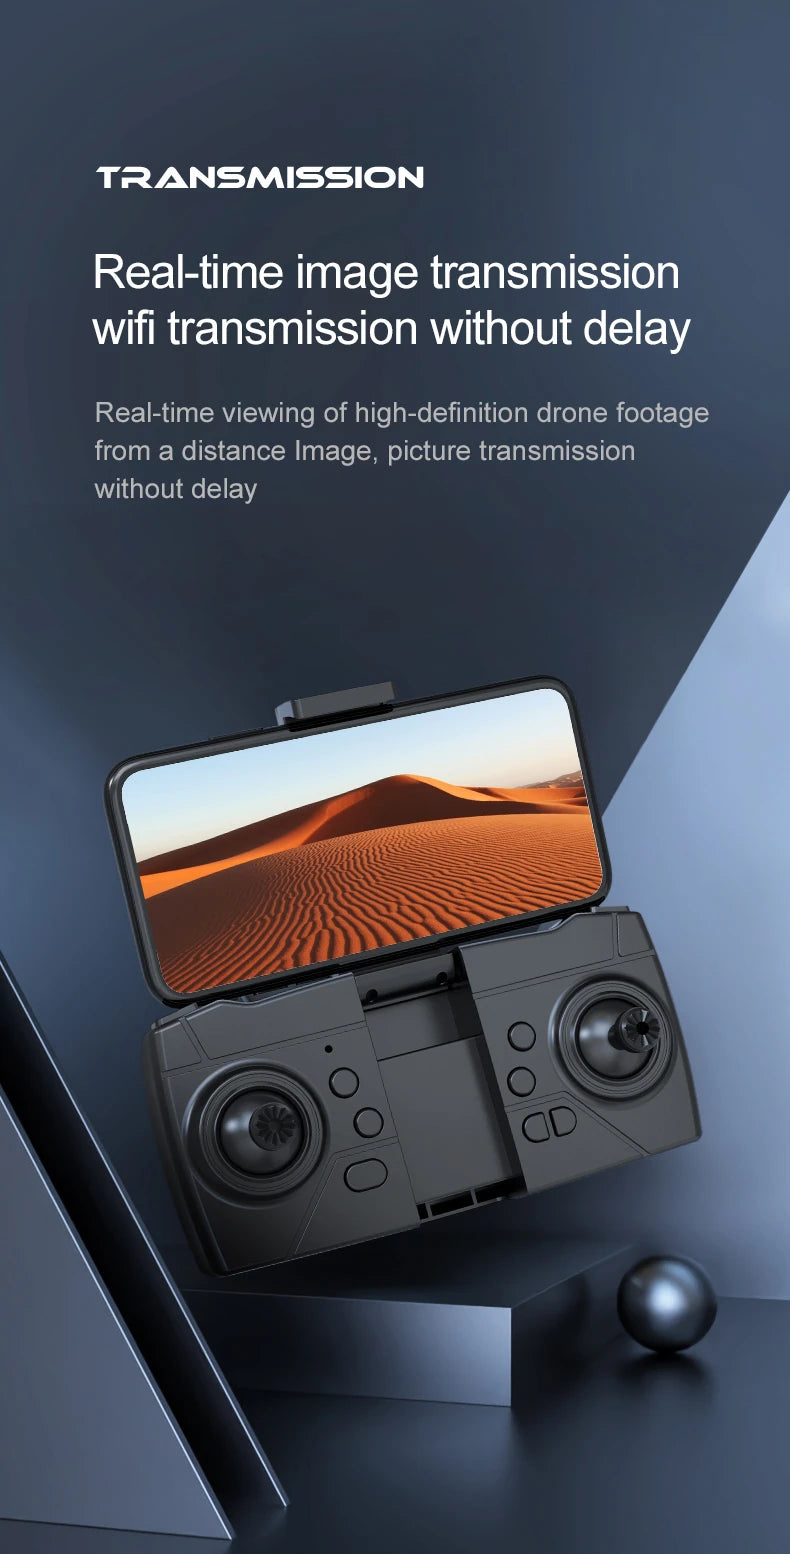 S8 Drone, transmission real-time image transmission wi-fi image transmission without delay